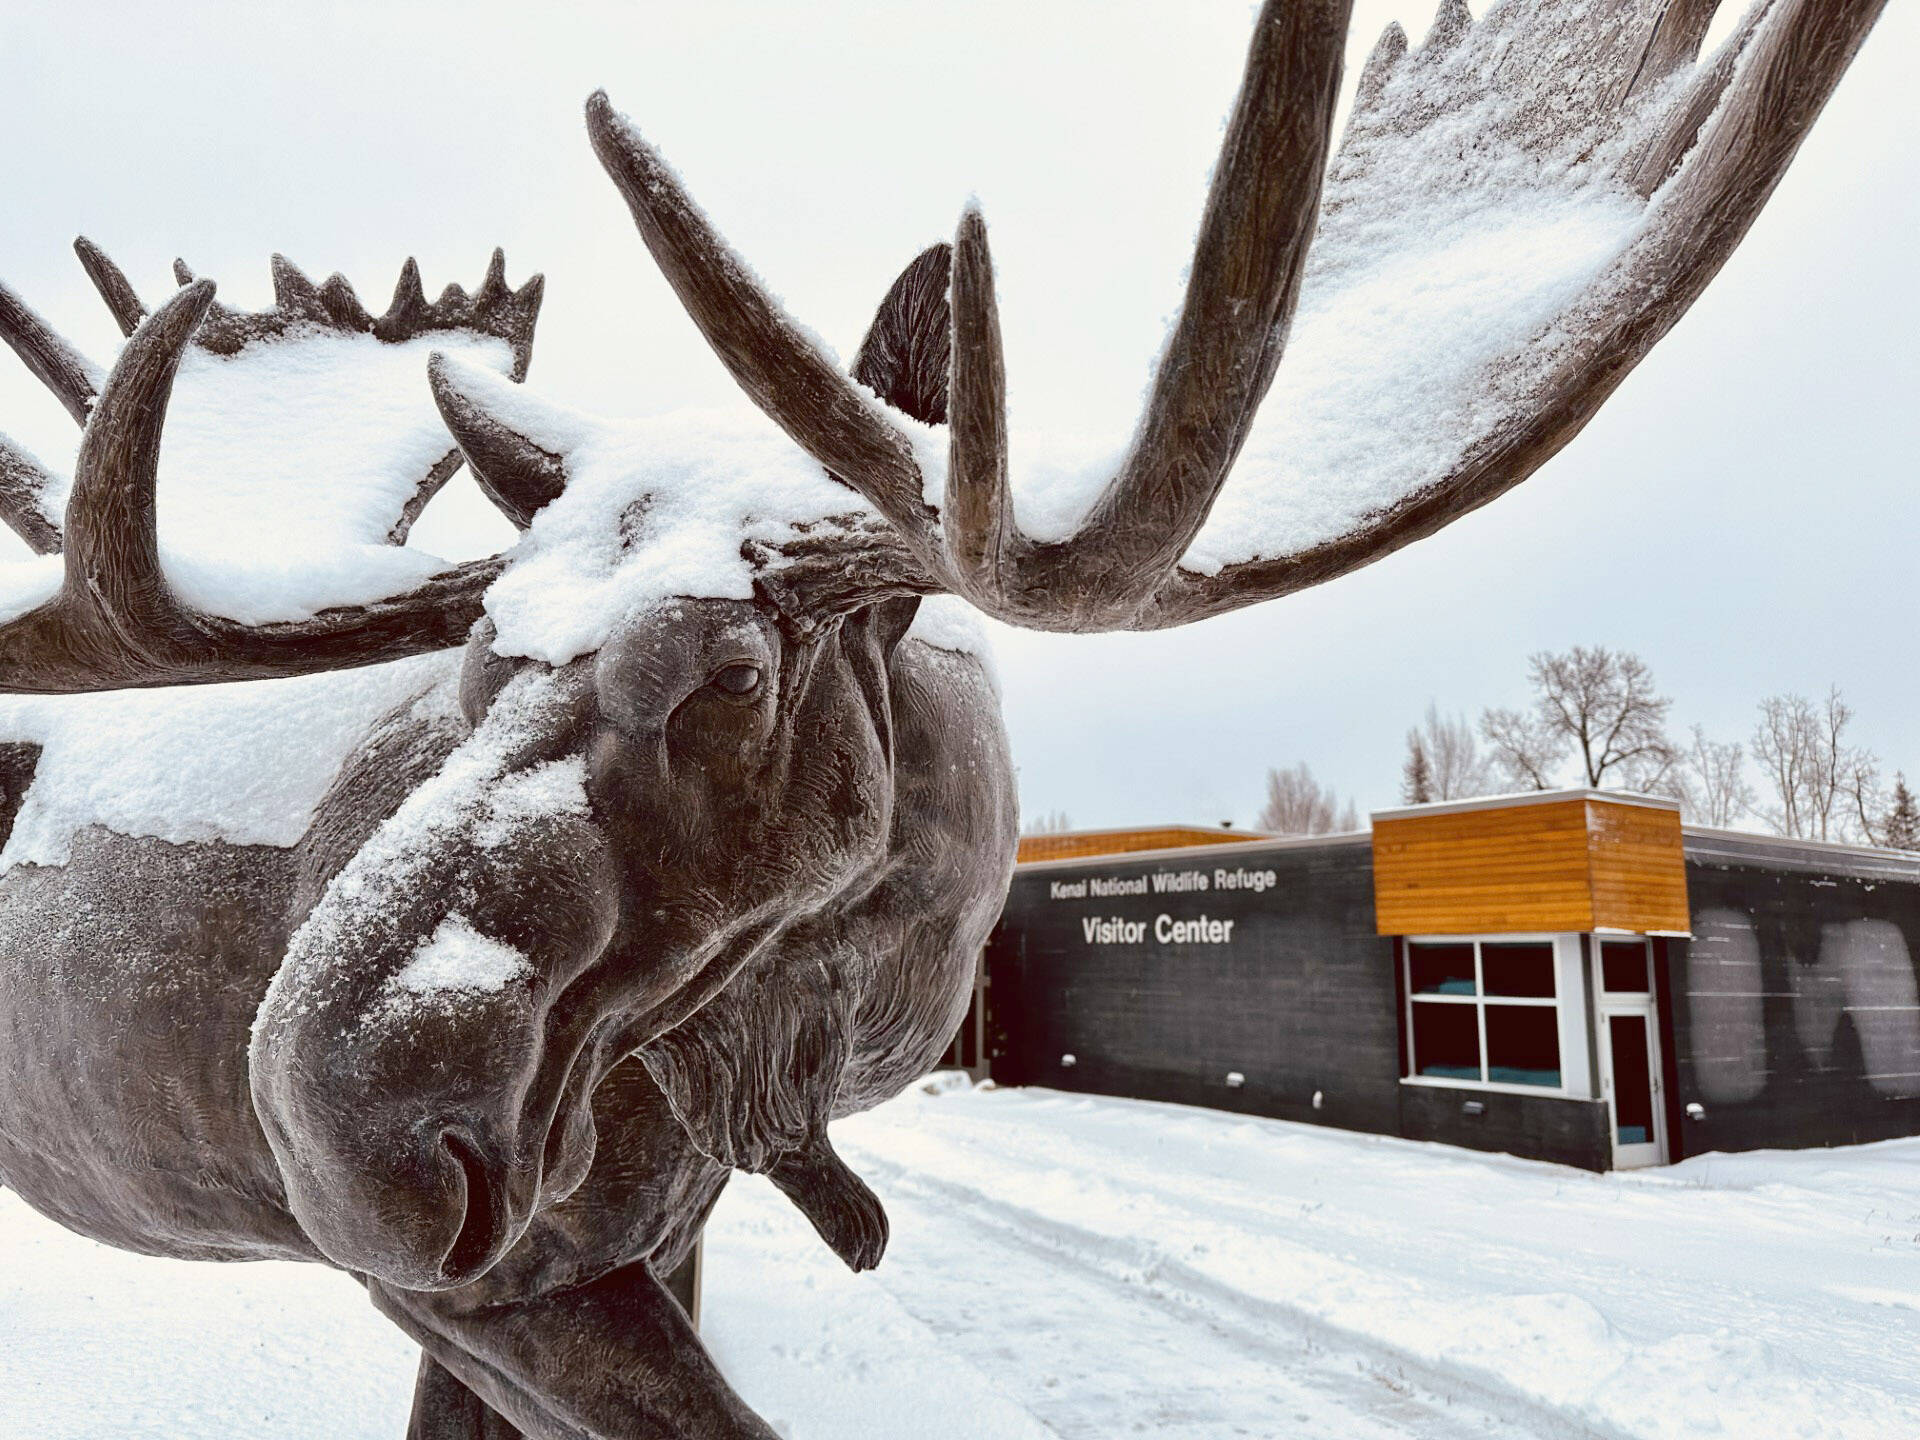 The bronze statue depicting a “giant Kenai Moose” of the early “19s” stands to welcome present-day guests to the Kenai National Wildlife Refuge Visitor Center in Soldotna, Alaska. (Photo by USFWS)